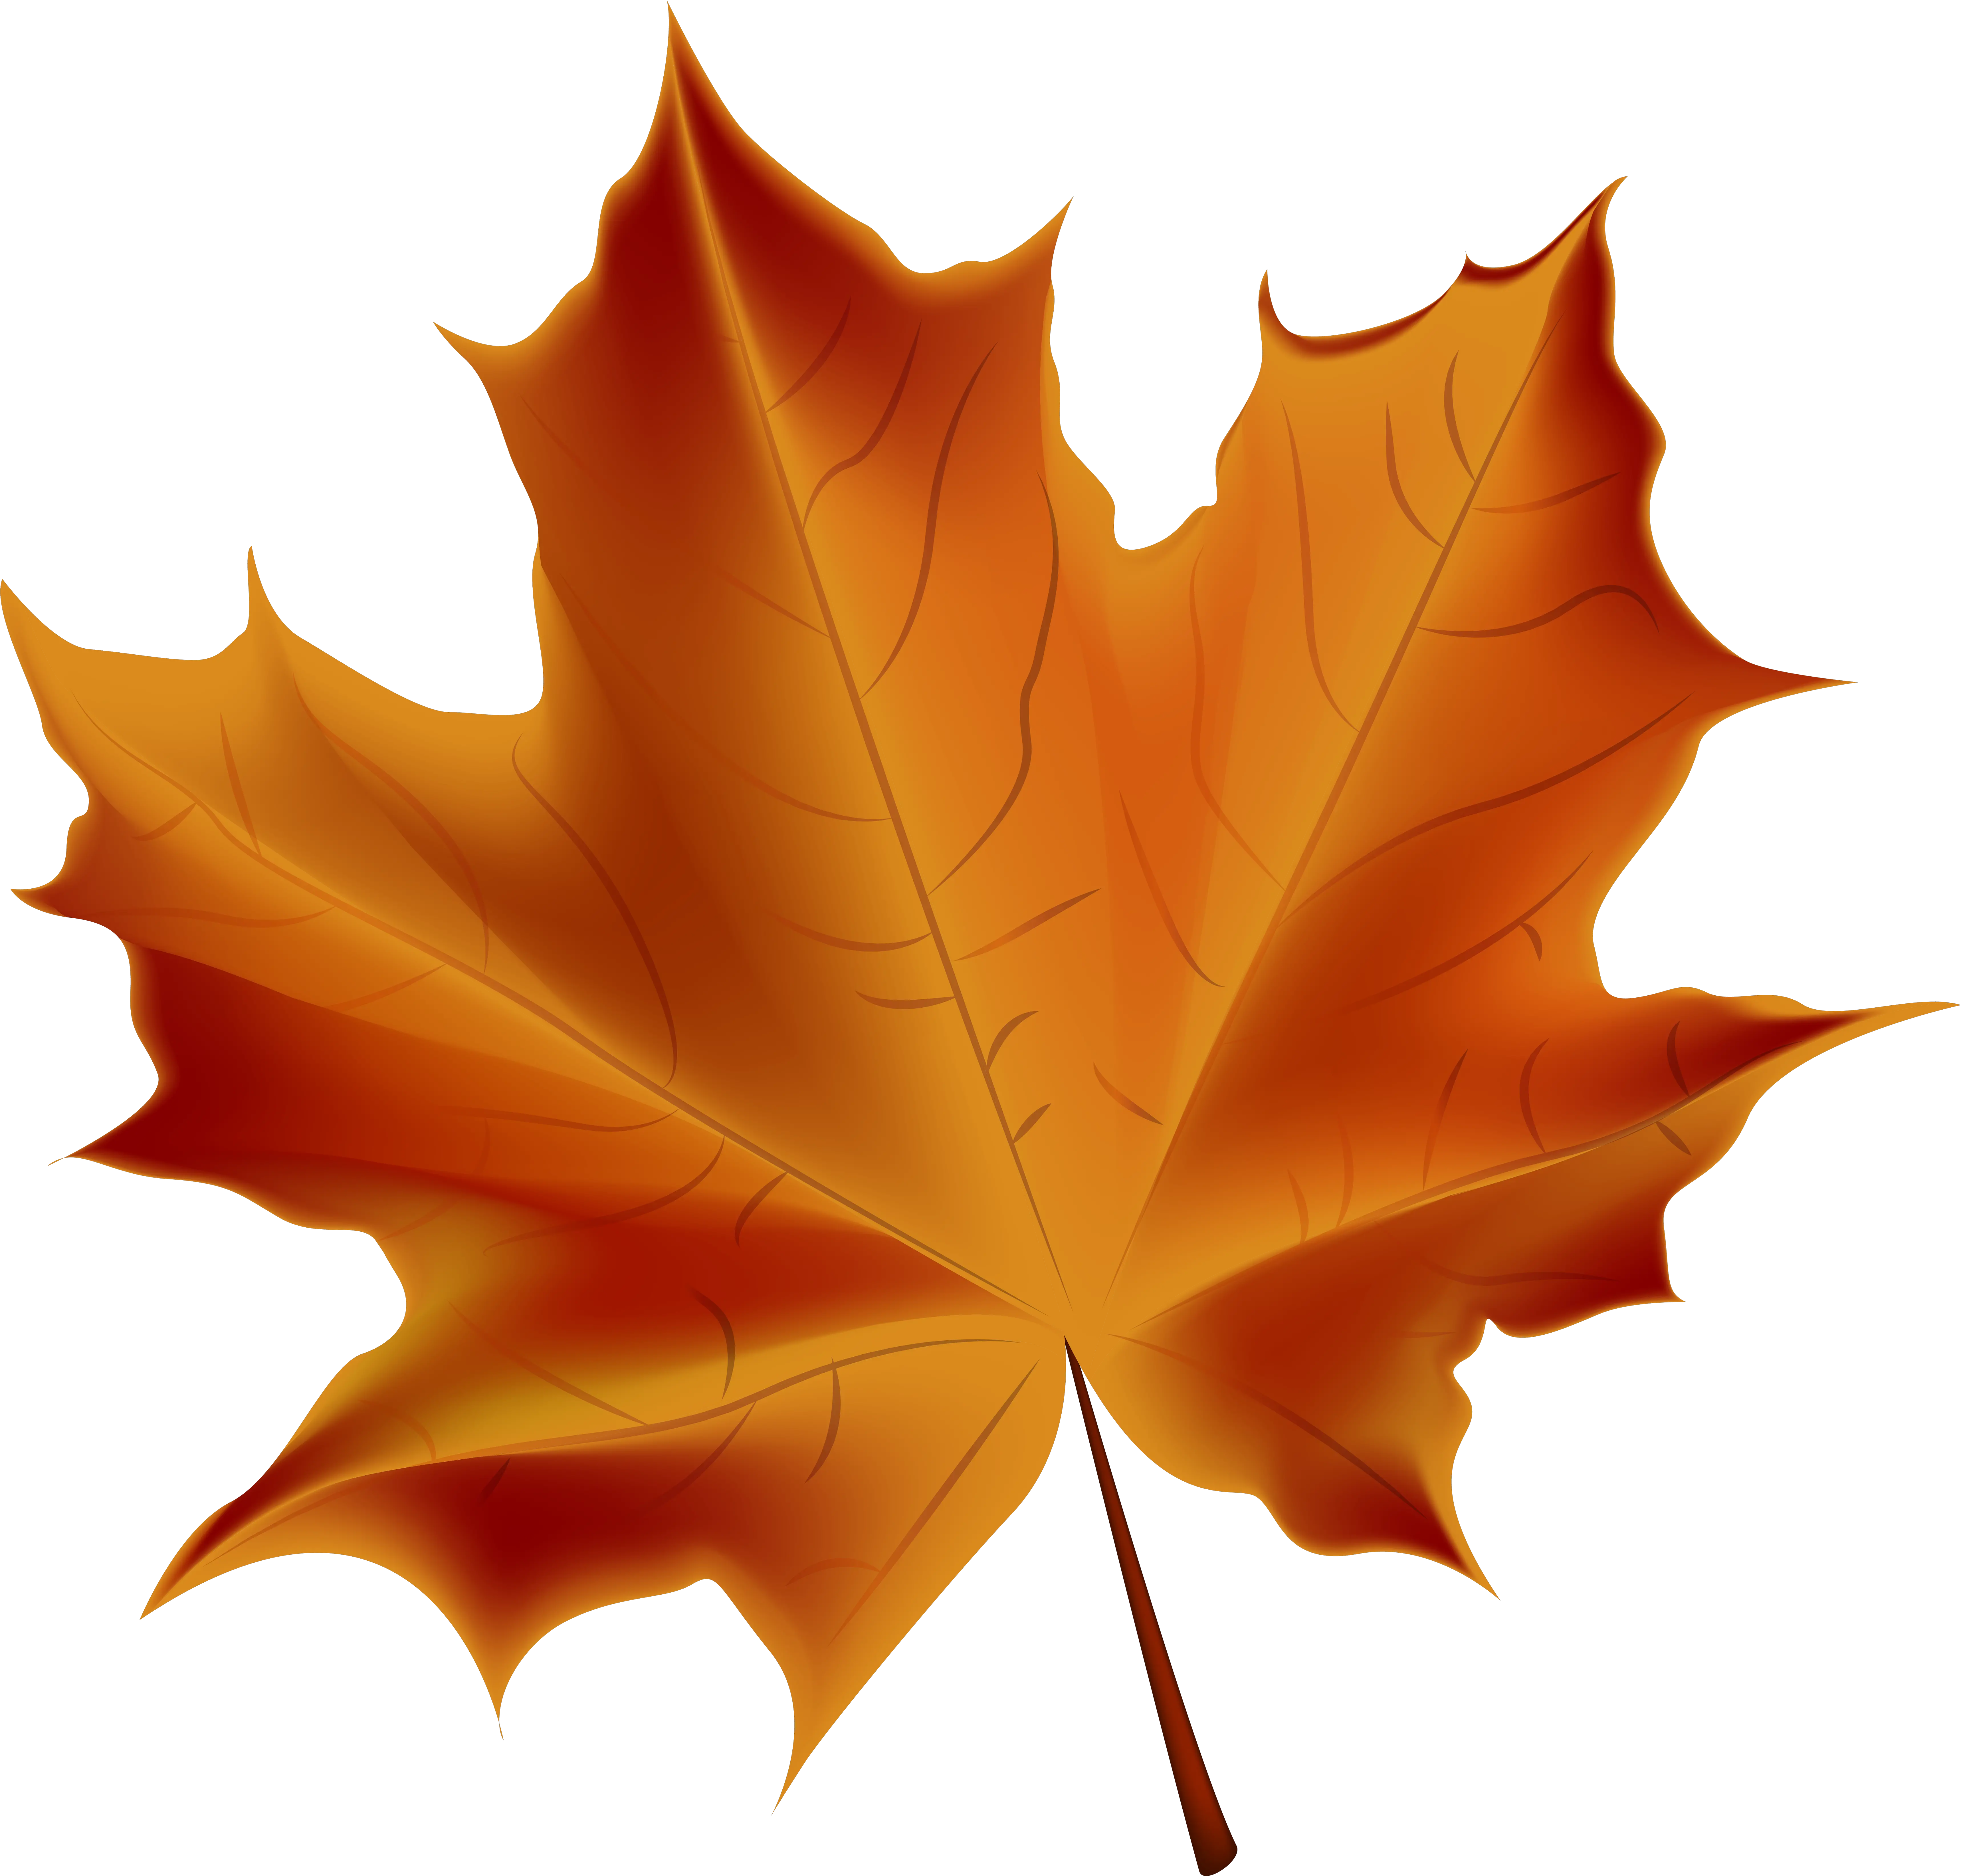 Leaves Transparent U0026 Png Clipart Free Download Ywd Transparent Background Fall Leaf Leaves Clipart Png